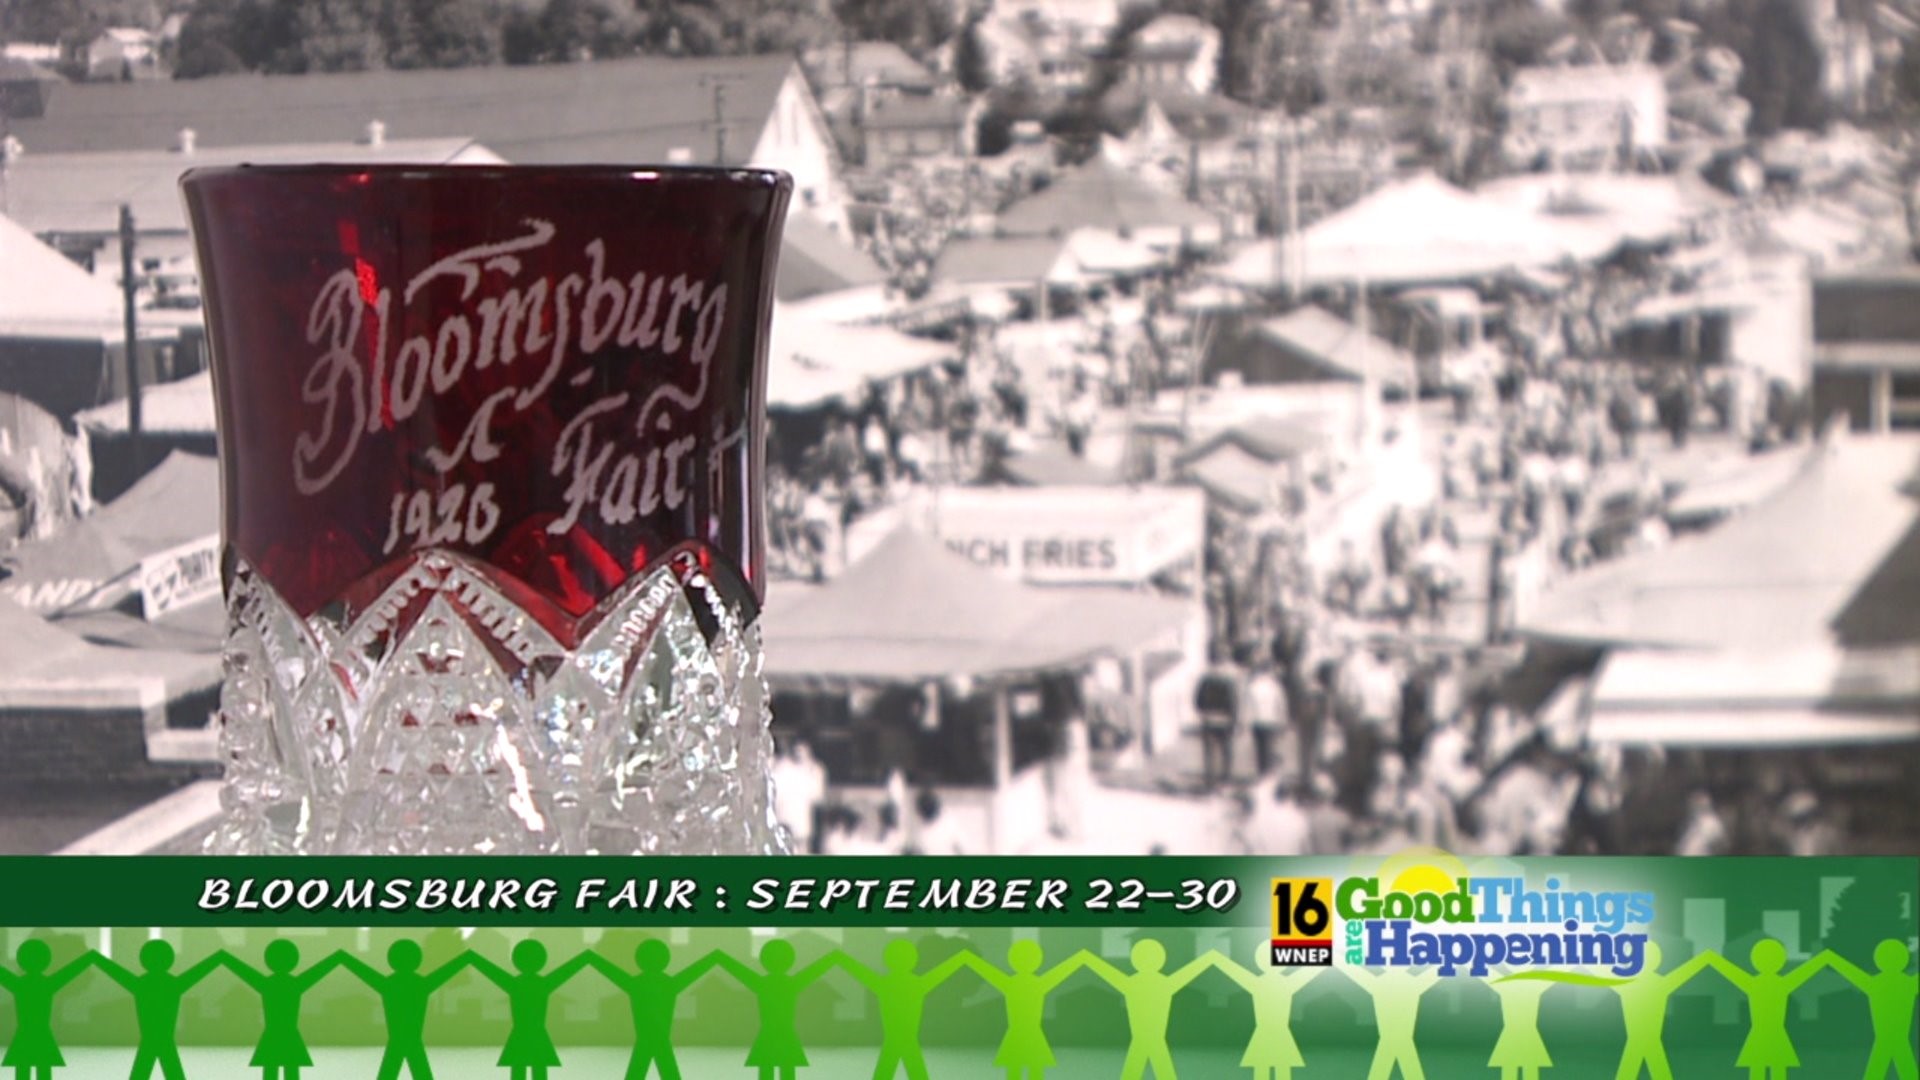 About Town Bloomsburg Fair